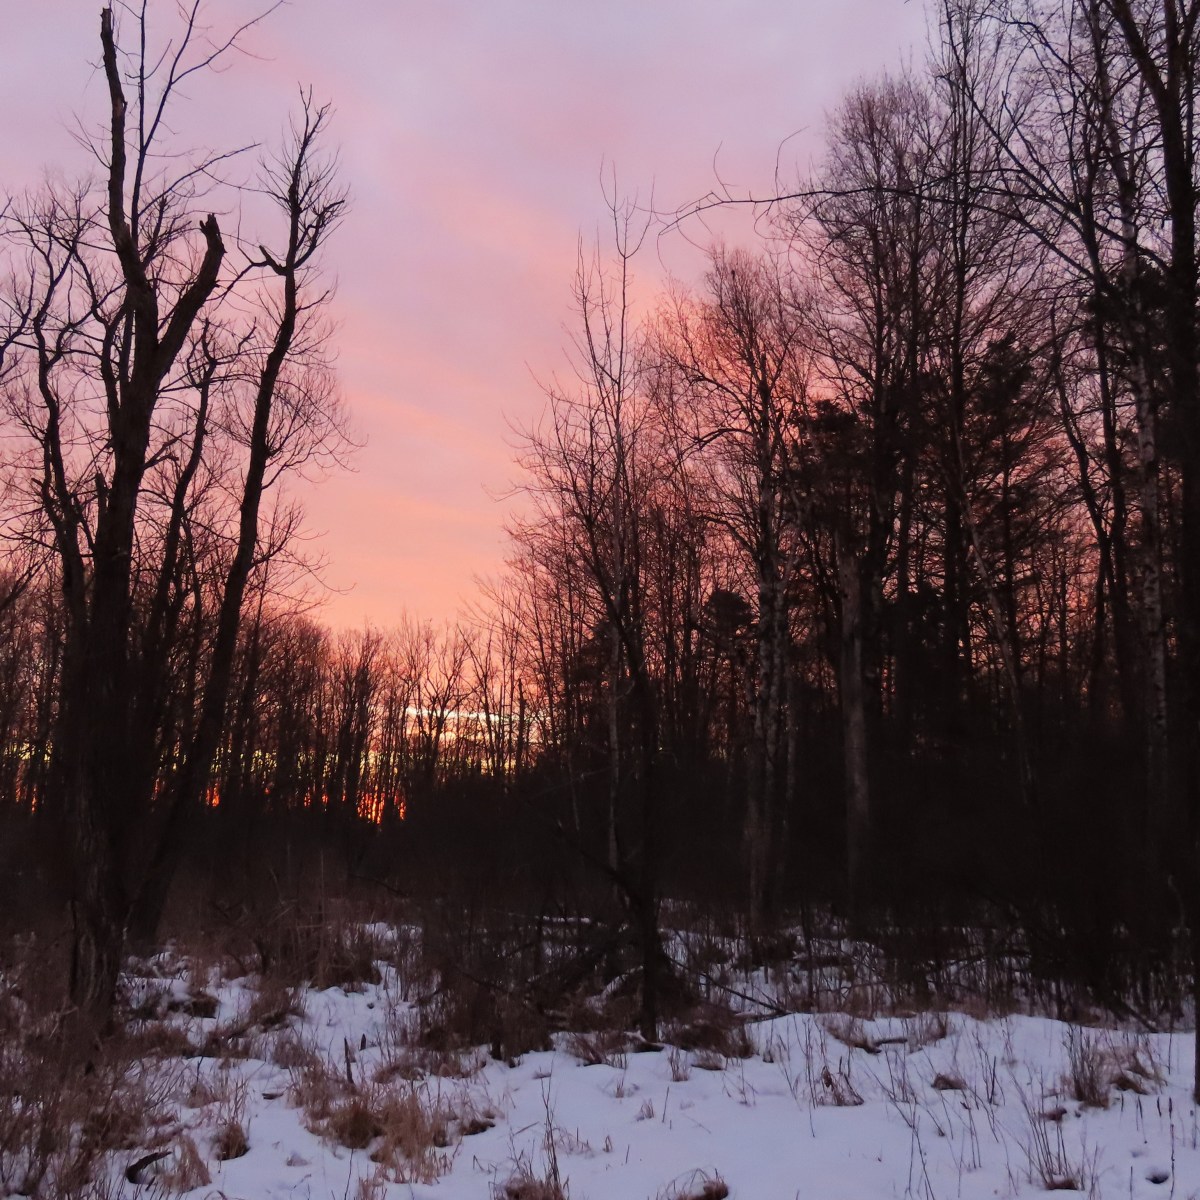 A pinkish-purple sky against a snow-covered wooded landscape